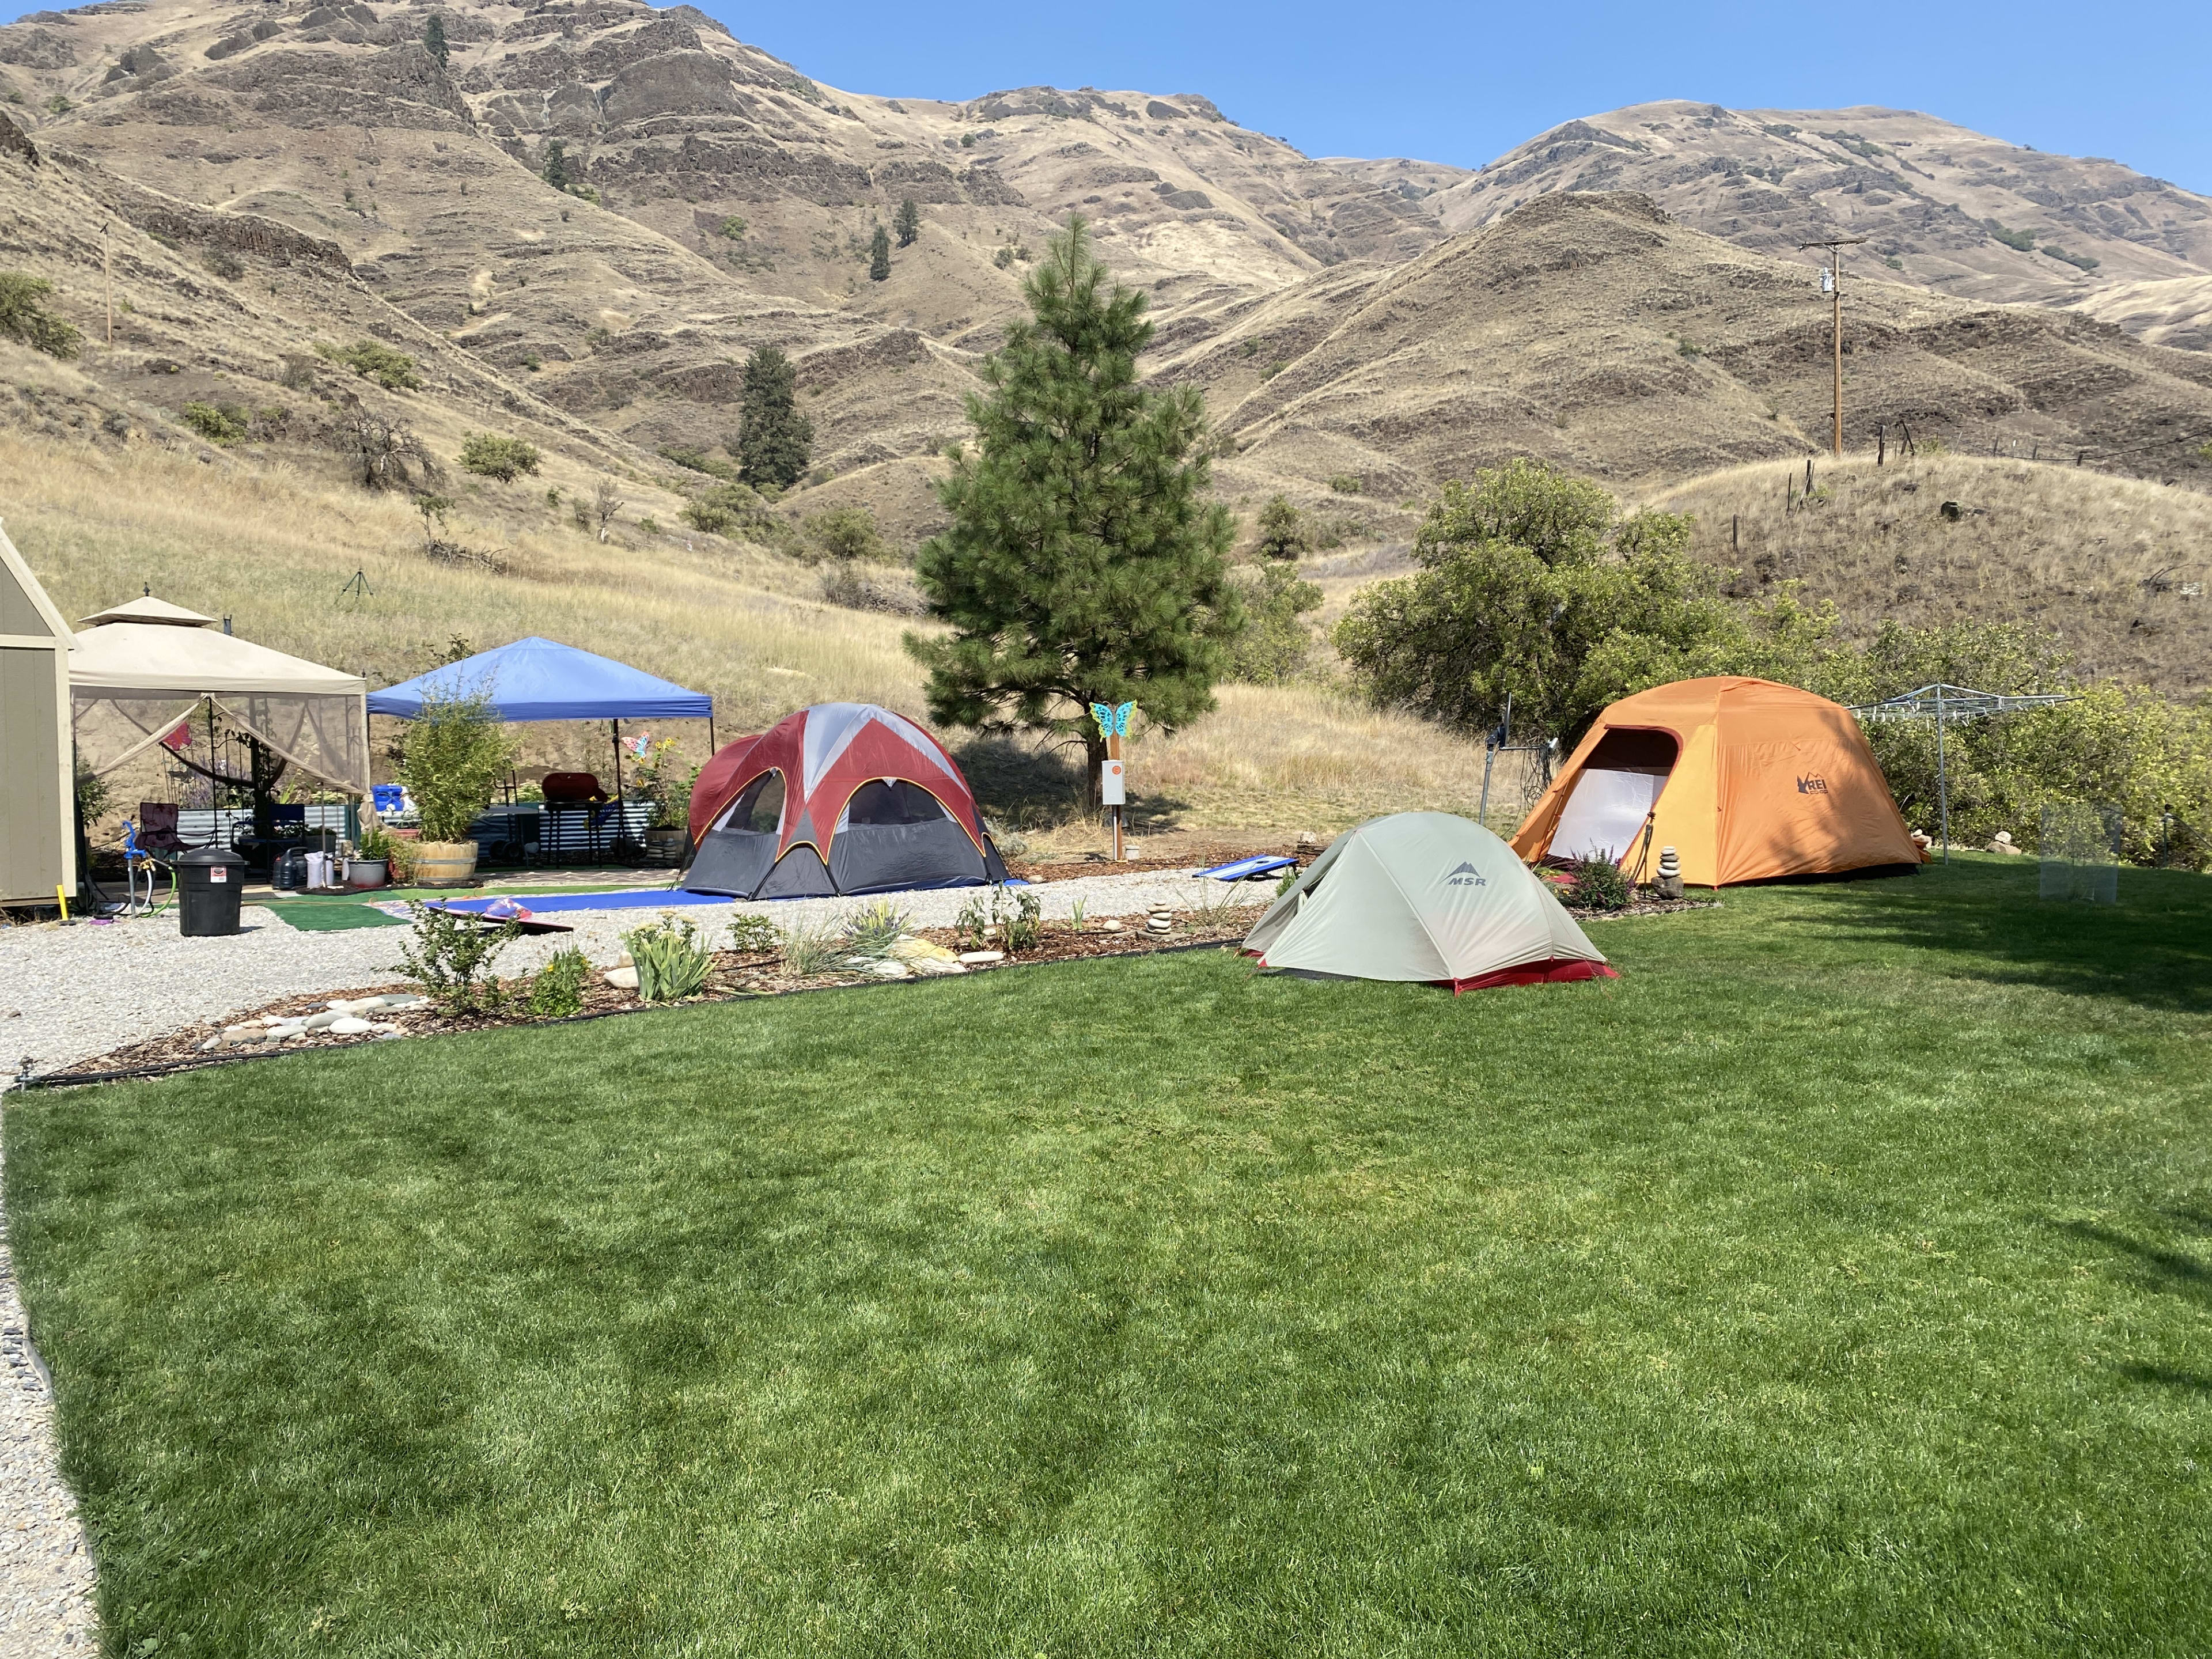 Tent site with RV rental only